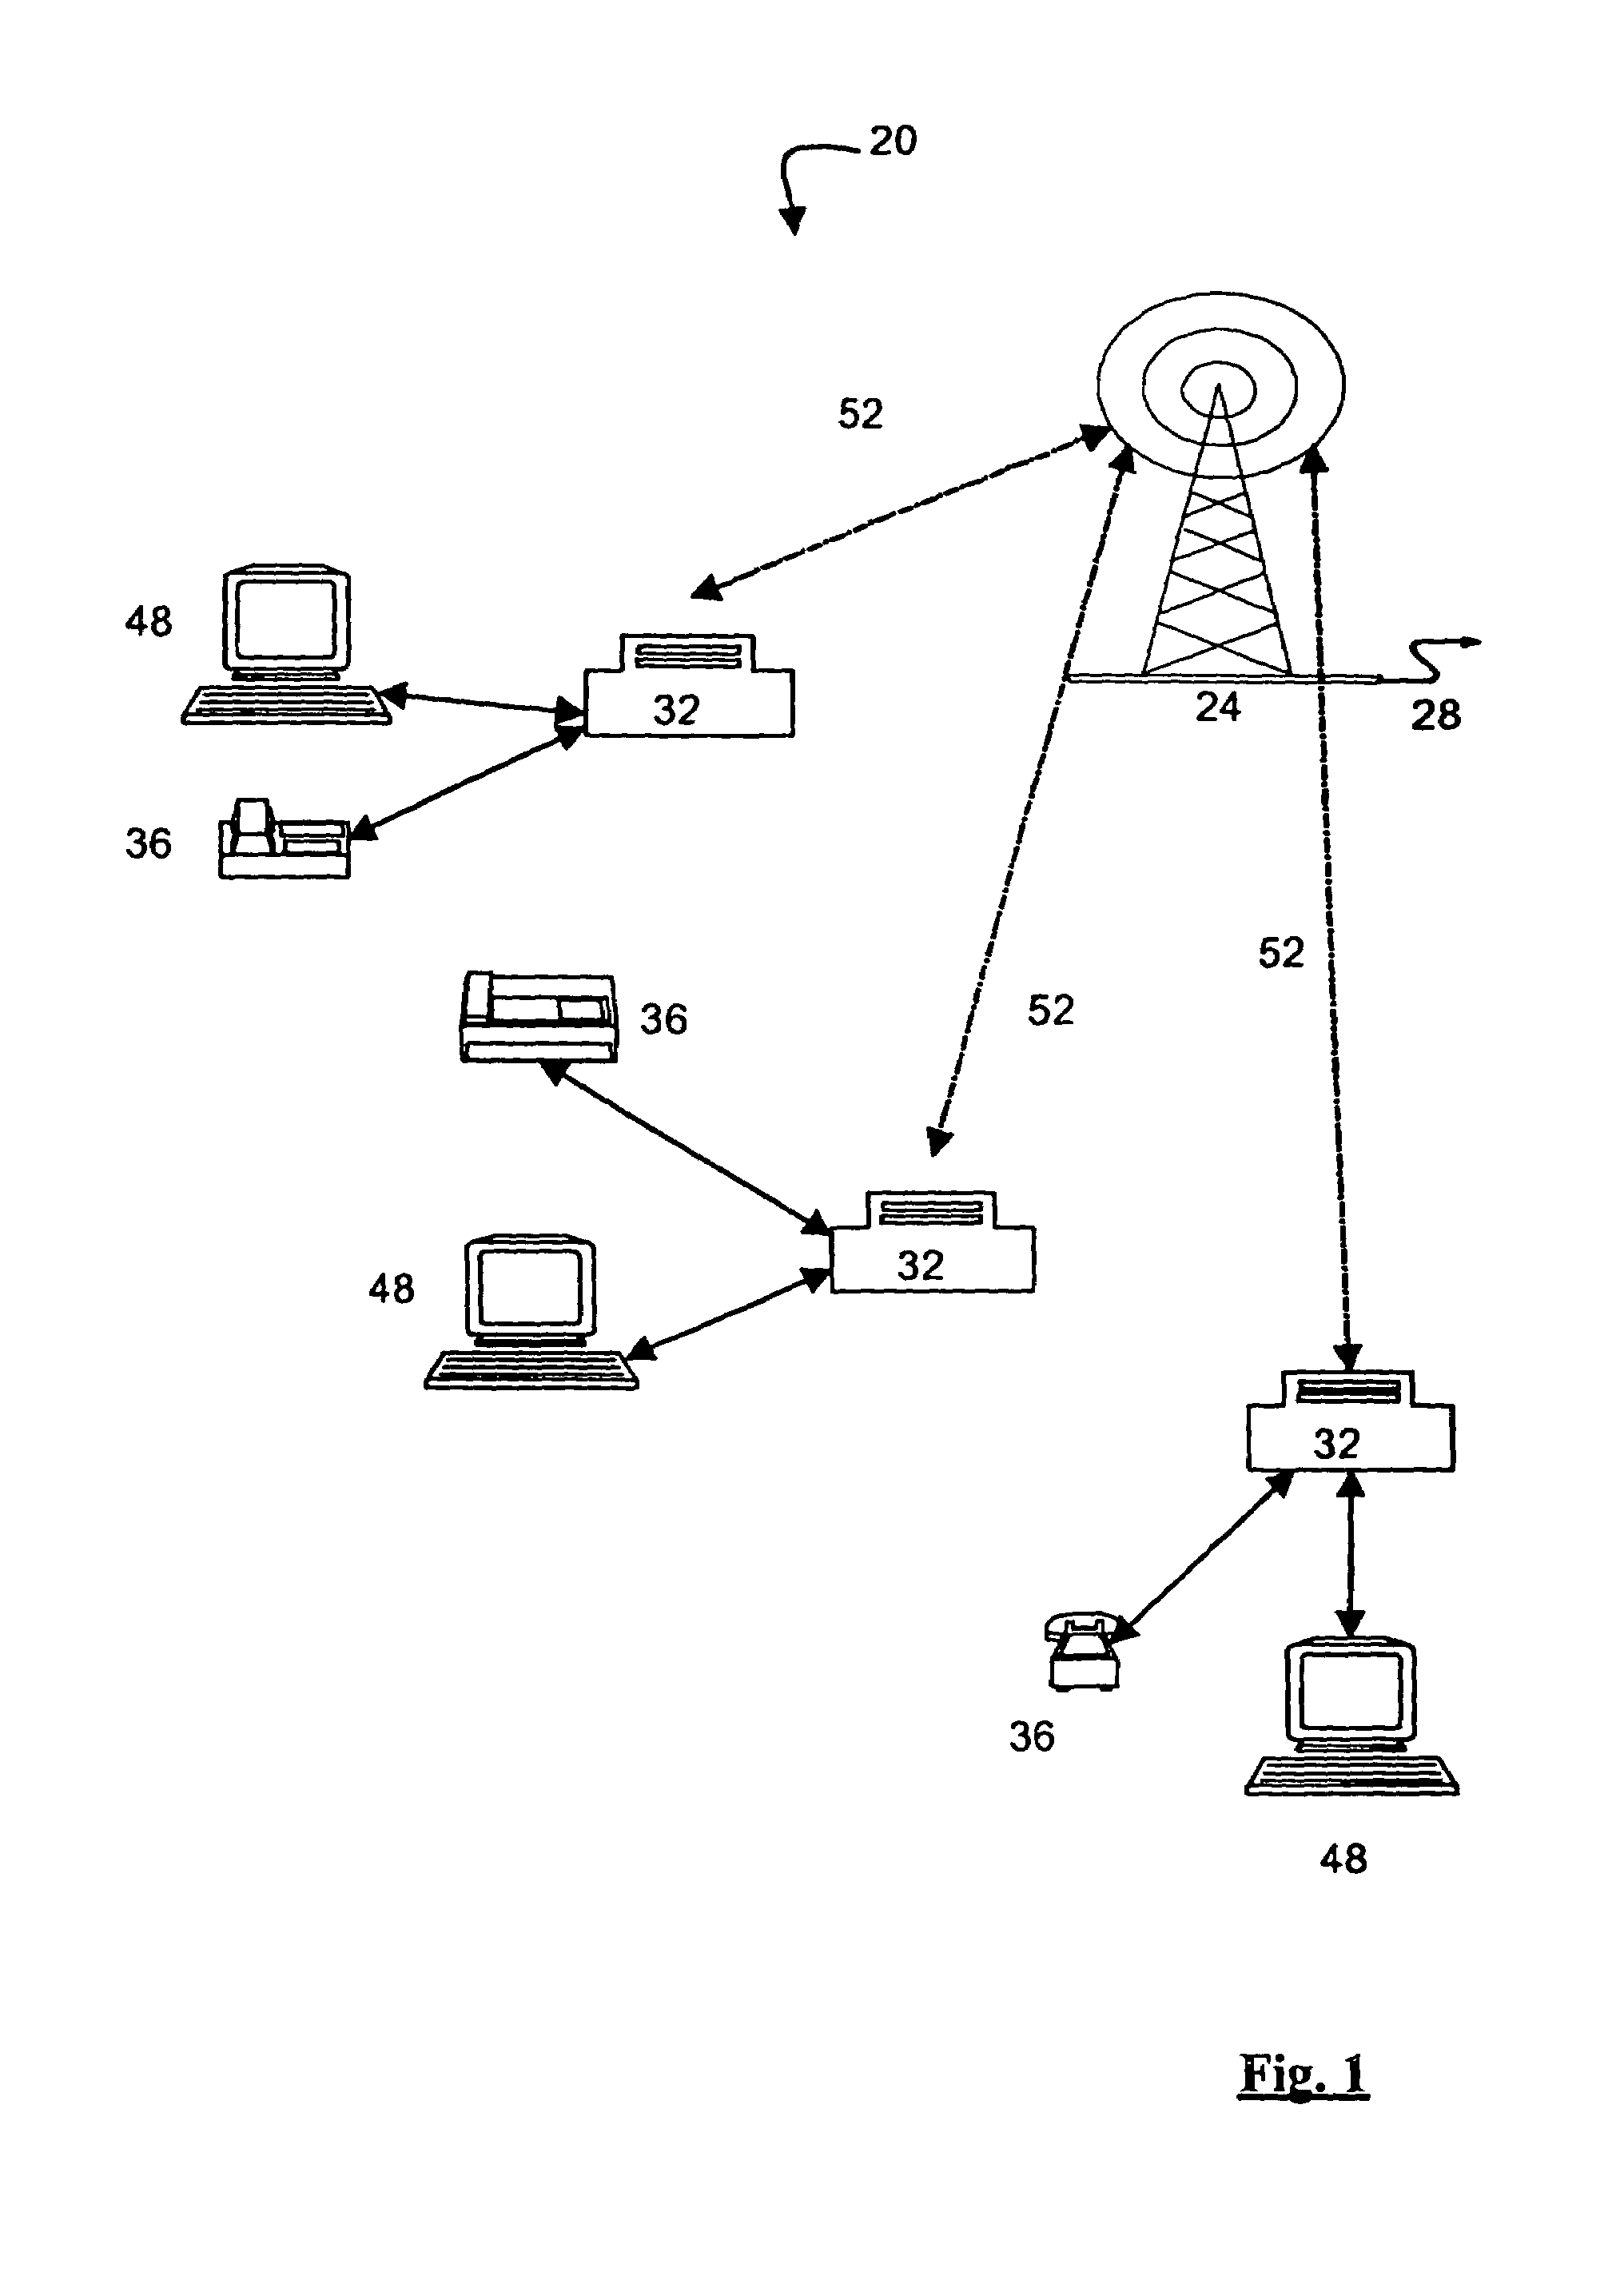 Communication structure for multiplexed links